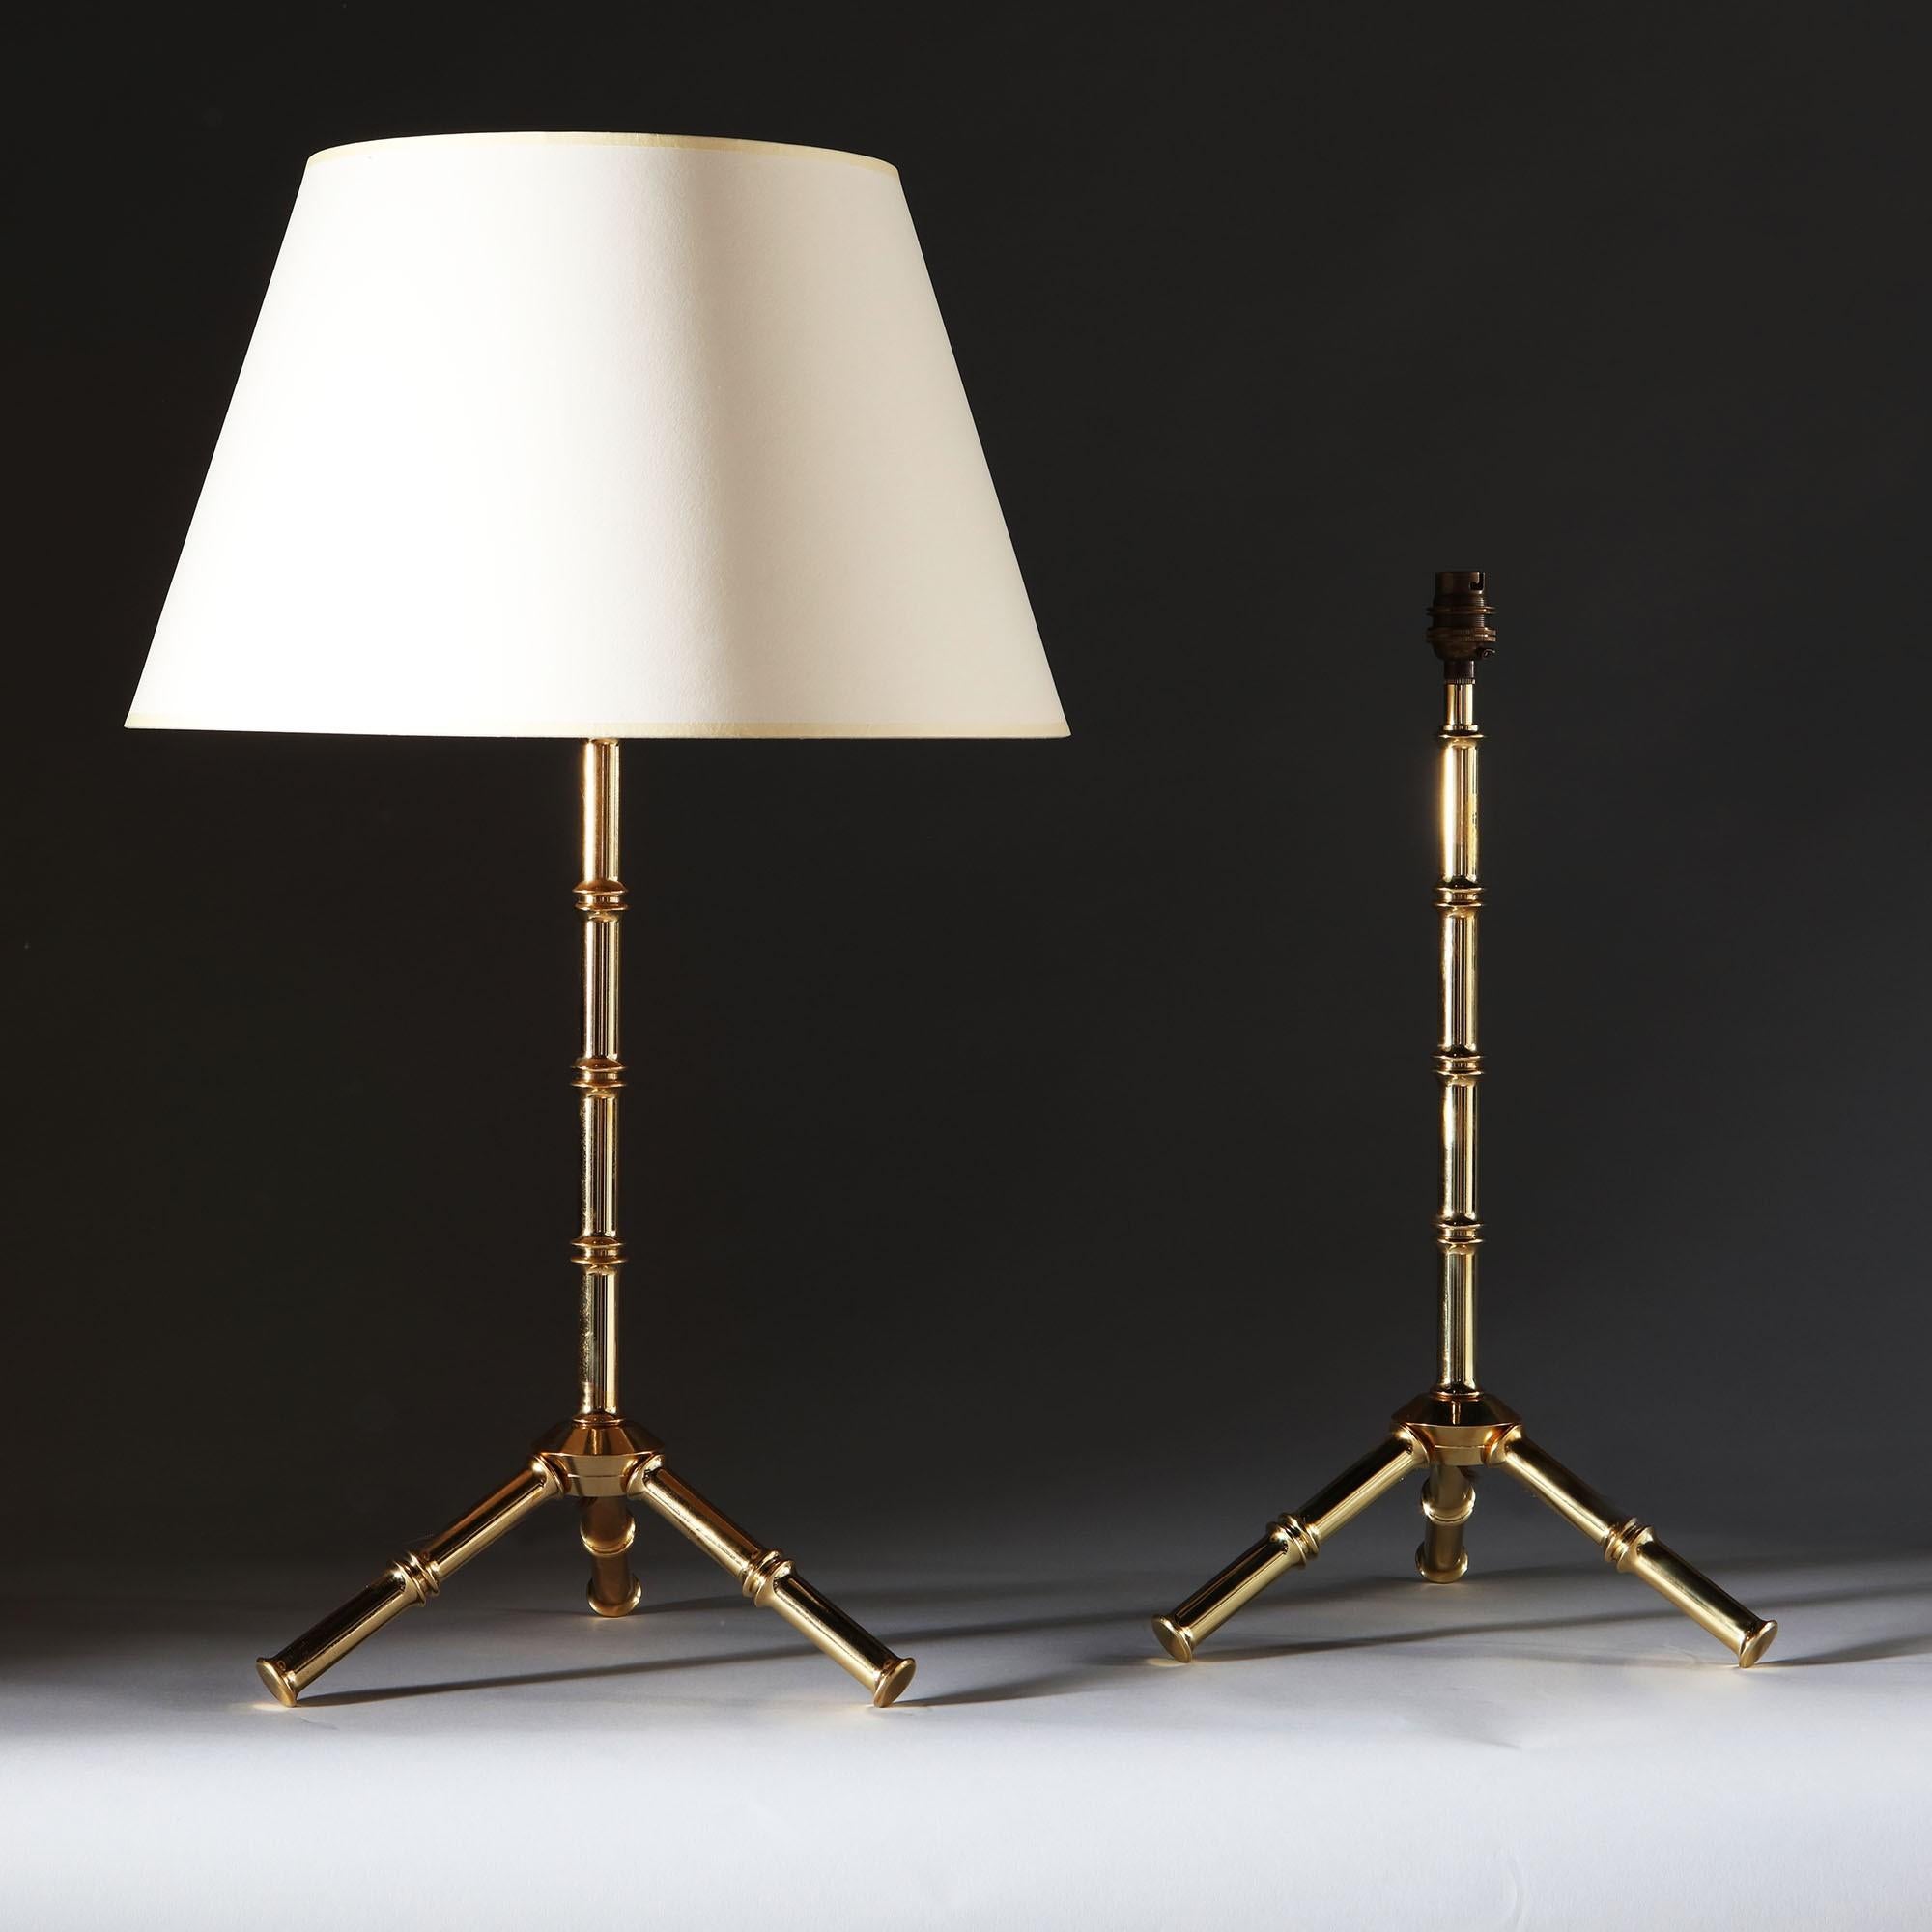 A pair of bamboo simulated brass lamps, standing on a tripod base.

Currently wired for the UK. Please enquire for rewiring services.

Please note: lampshades not included.